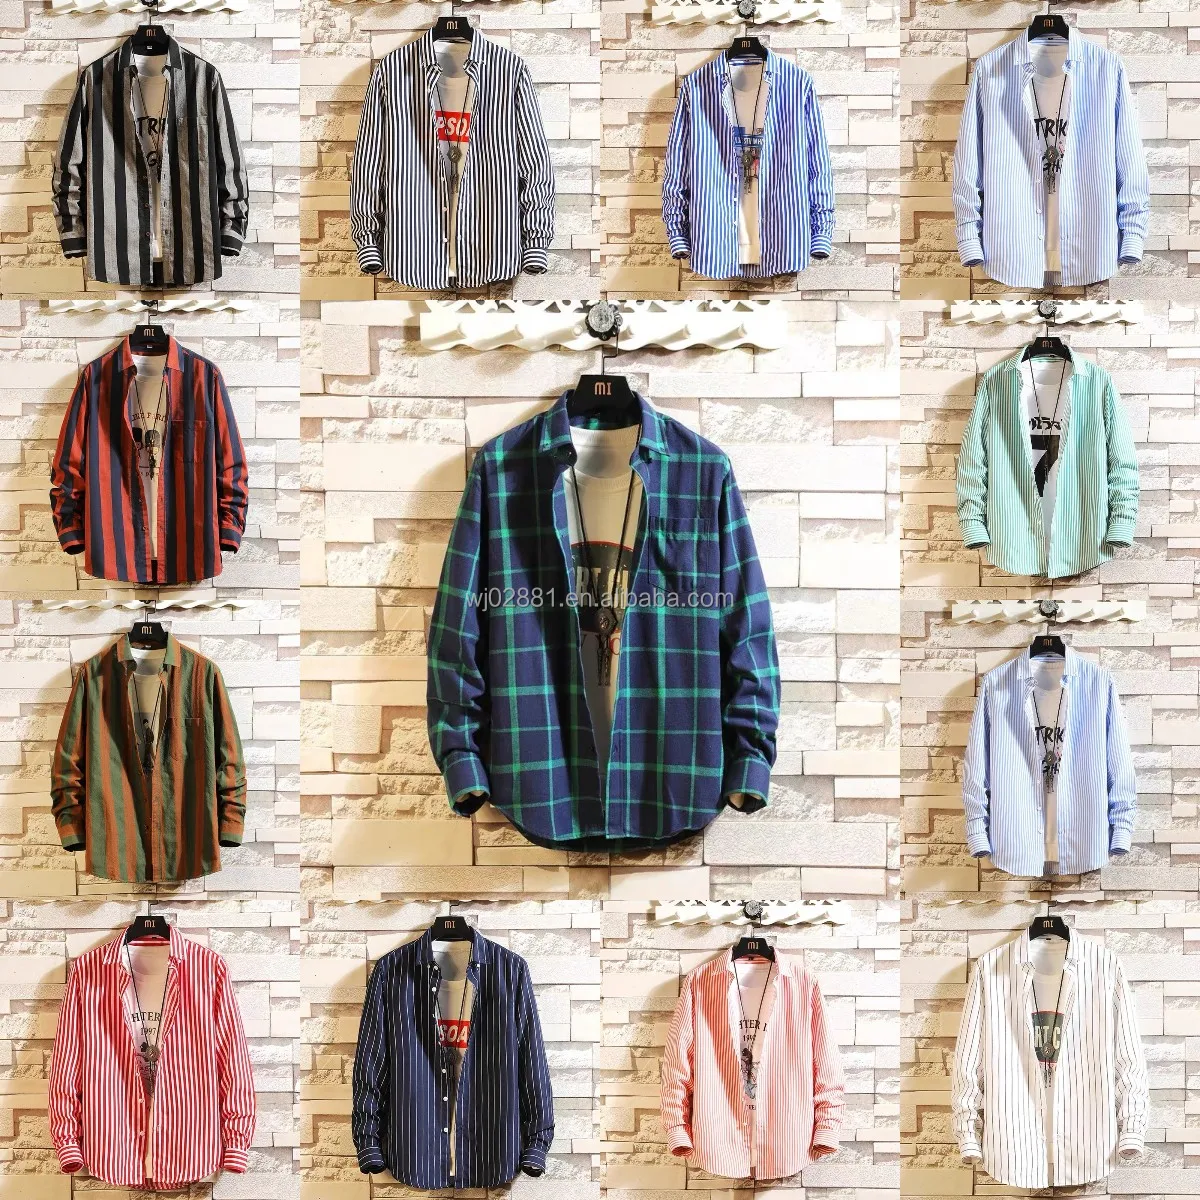 High Quality Wholesale Foldover Collar Long Sleeve Warm Plaid Spring Men's Solid Casual Shirt